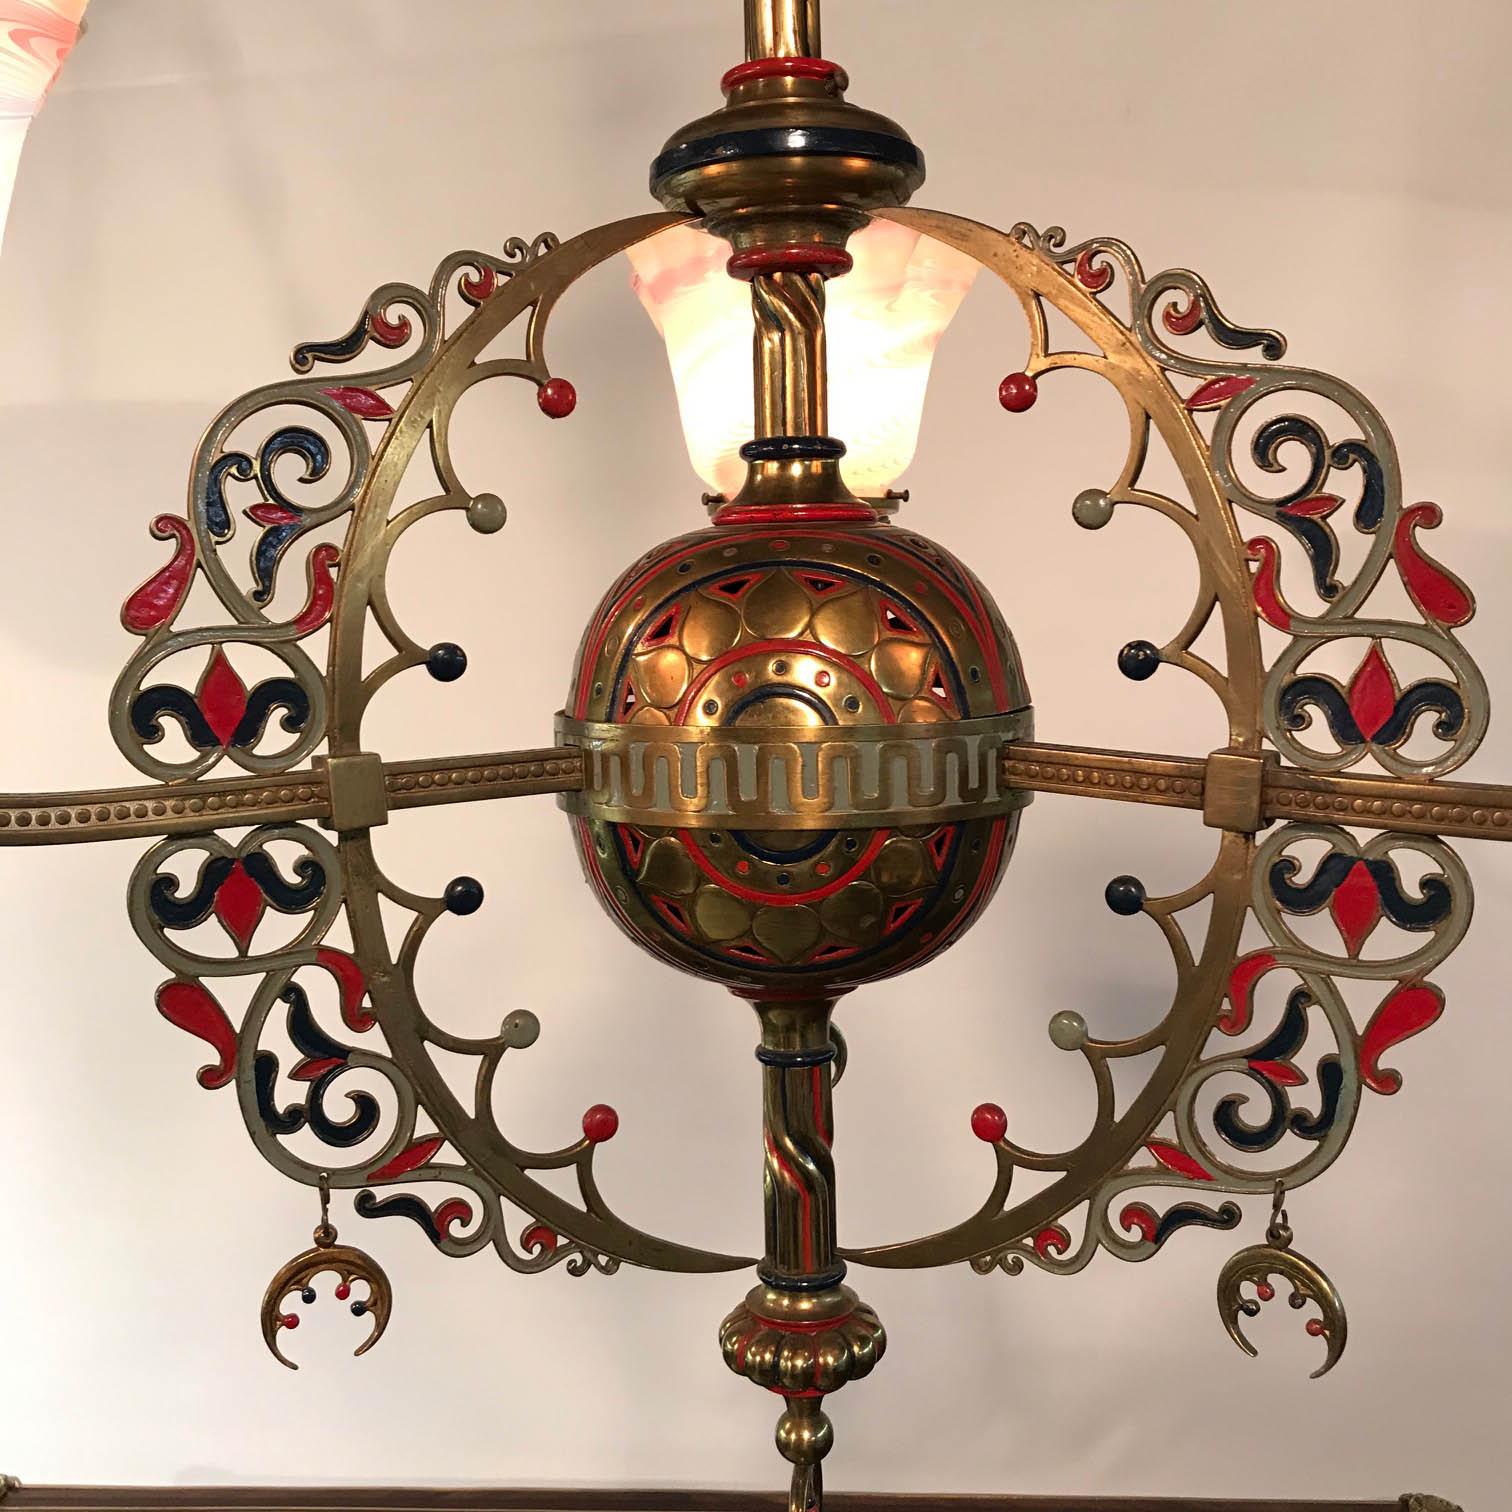 This highly unusual gas fixture has been converted to electricity but in every other respect is unchanged. From a central sphere three arms extend, each with charming original gas cocks modelled as fleurs de lys and hung with pendant crescents. Each